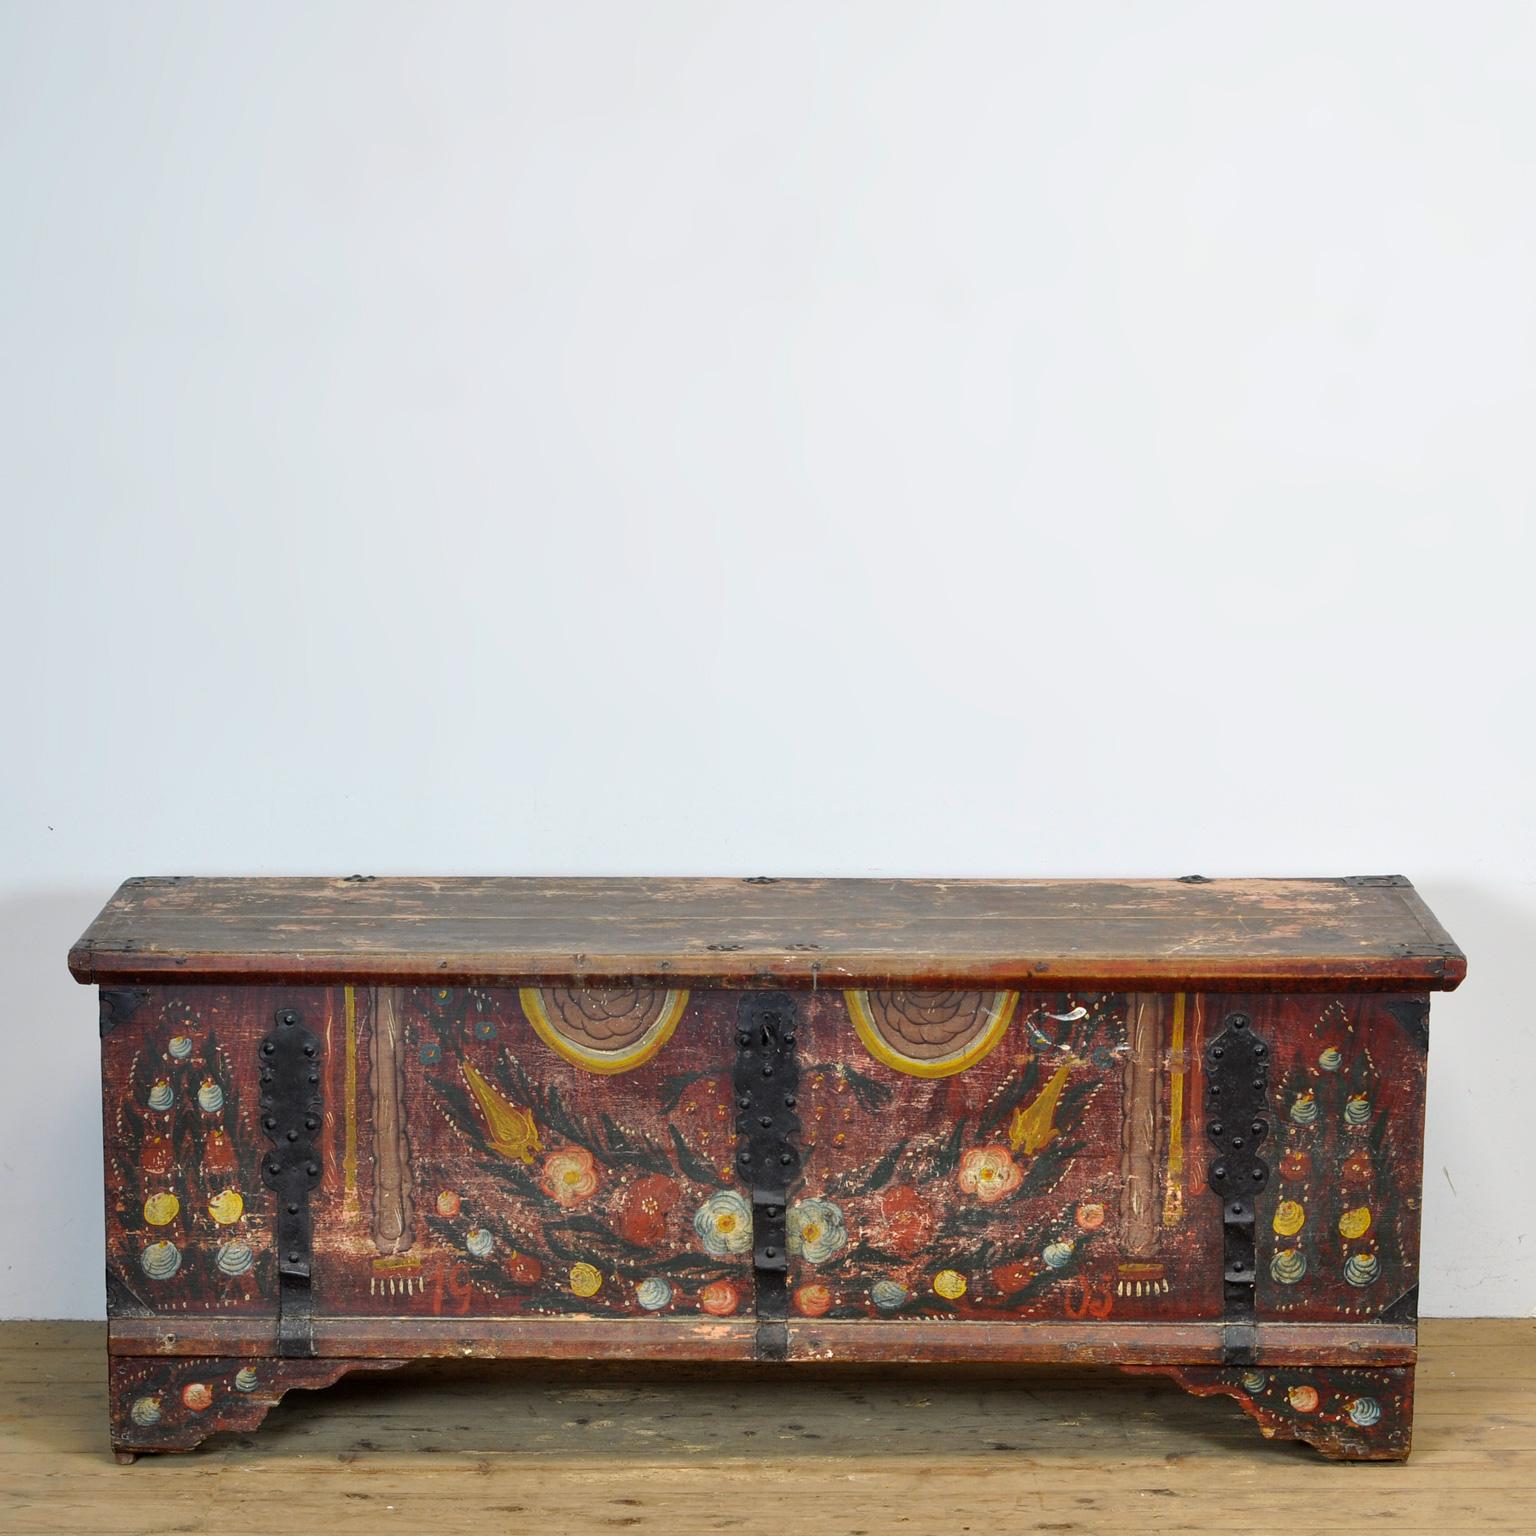 Wedding Chest in pastel shades, Eastern Europe, anno 1905, with roses and targets on a red background. A fine example of this particular type of box found in present-day eastern Romania, but very similar to painted boxes found in Bulgaria and